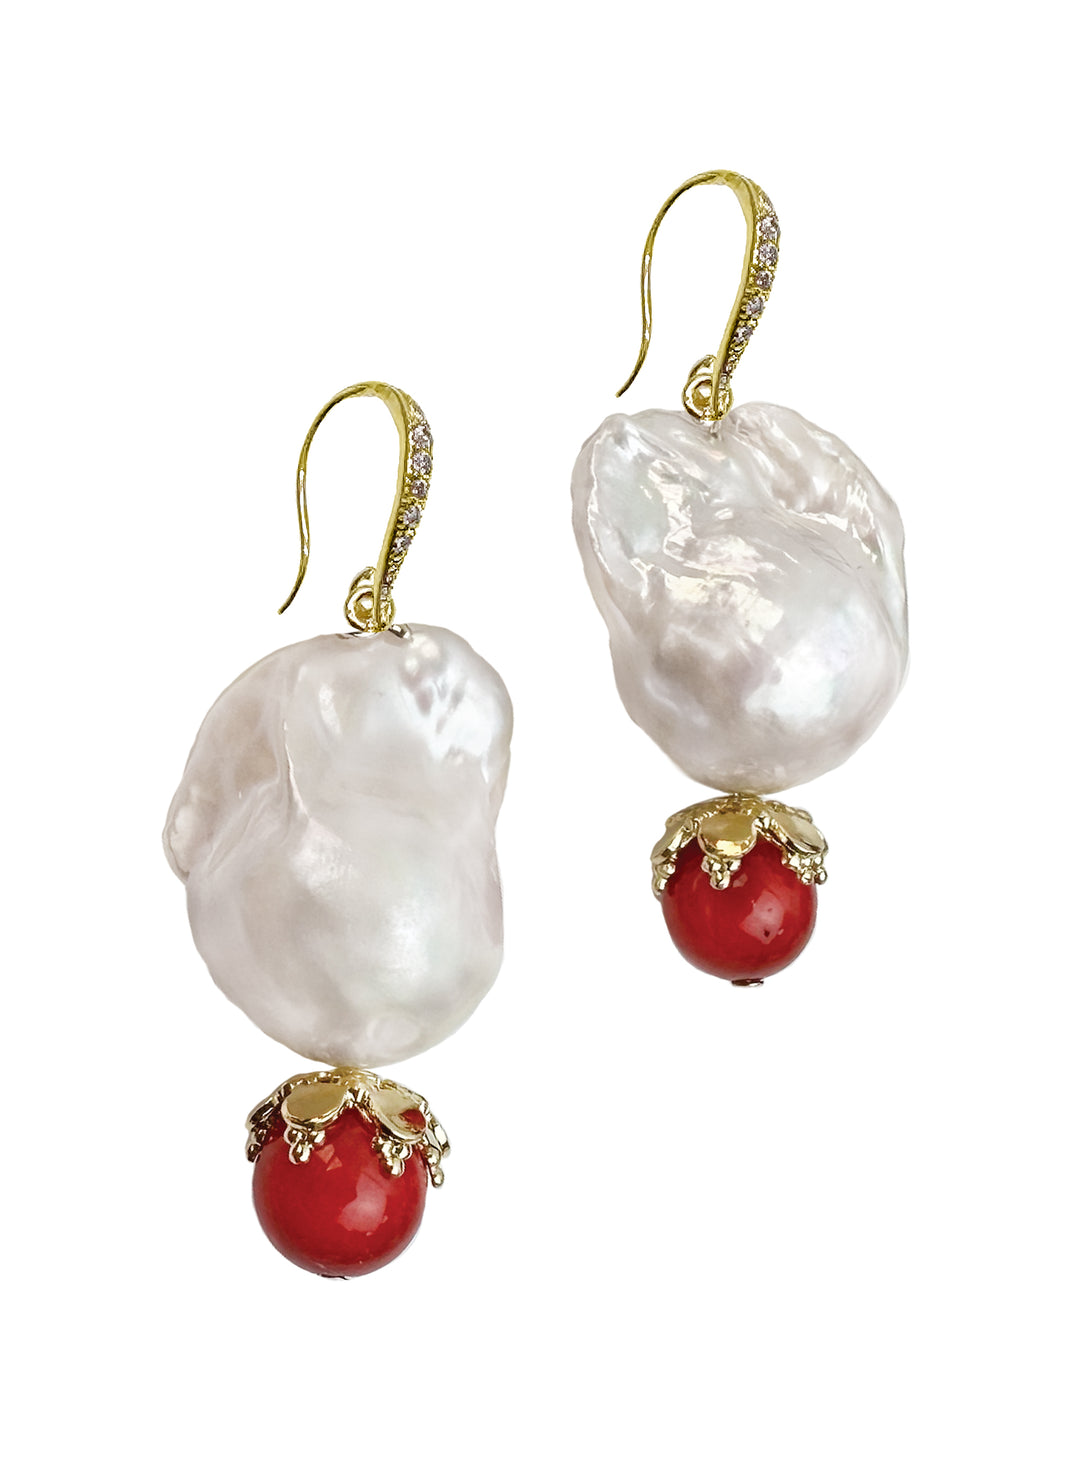  Perfect for both casual and formal occasions, these earrings effortlessly blend classic and contemporary style. 